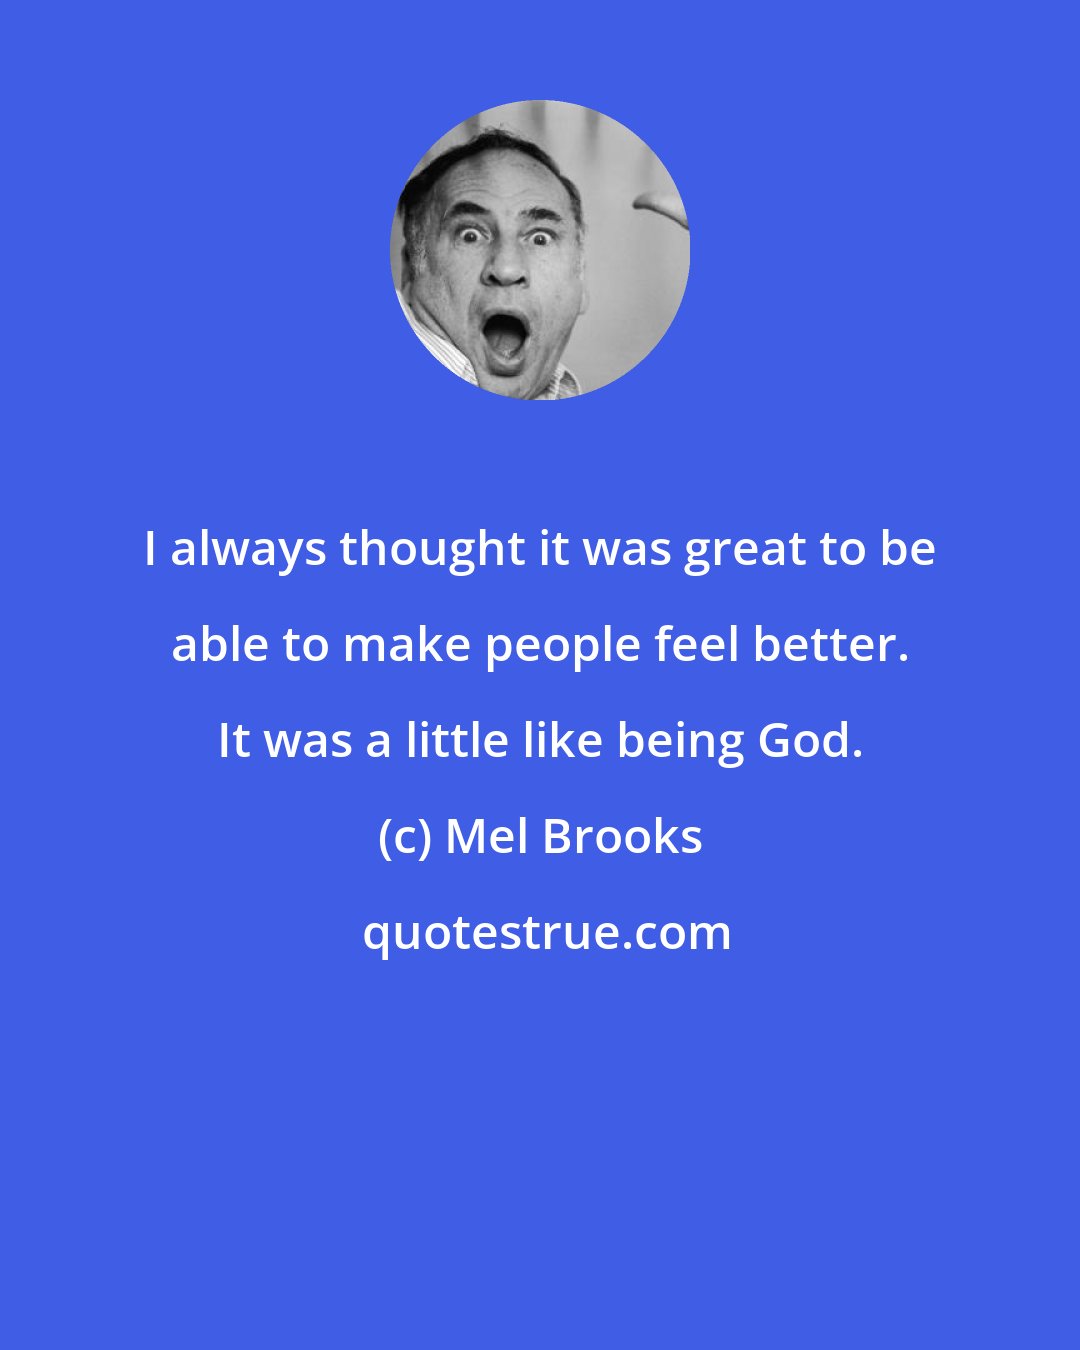 Mel Brooks: I always thought it was great to be able to make people feel better. It was a little like being God.